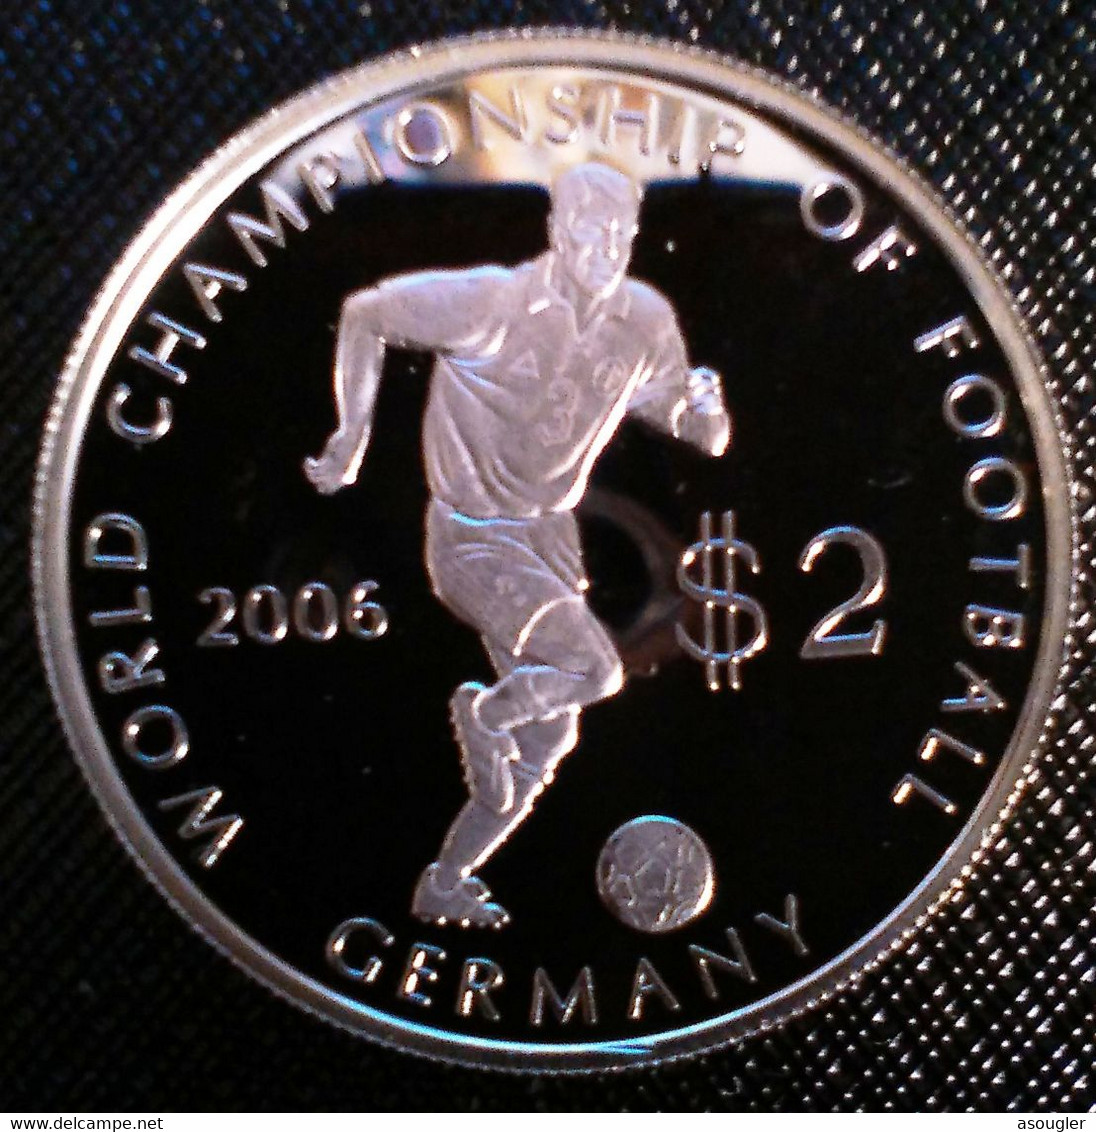 Cook Islands 2 DOLLARS 2003 SILVER PROOF "word Championship Football Germany 2006"free Shipping Via Registered Air Mail" - Cook